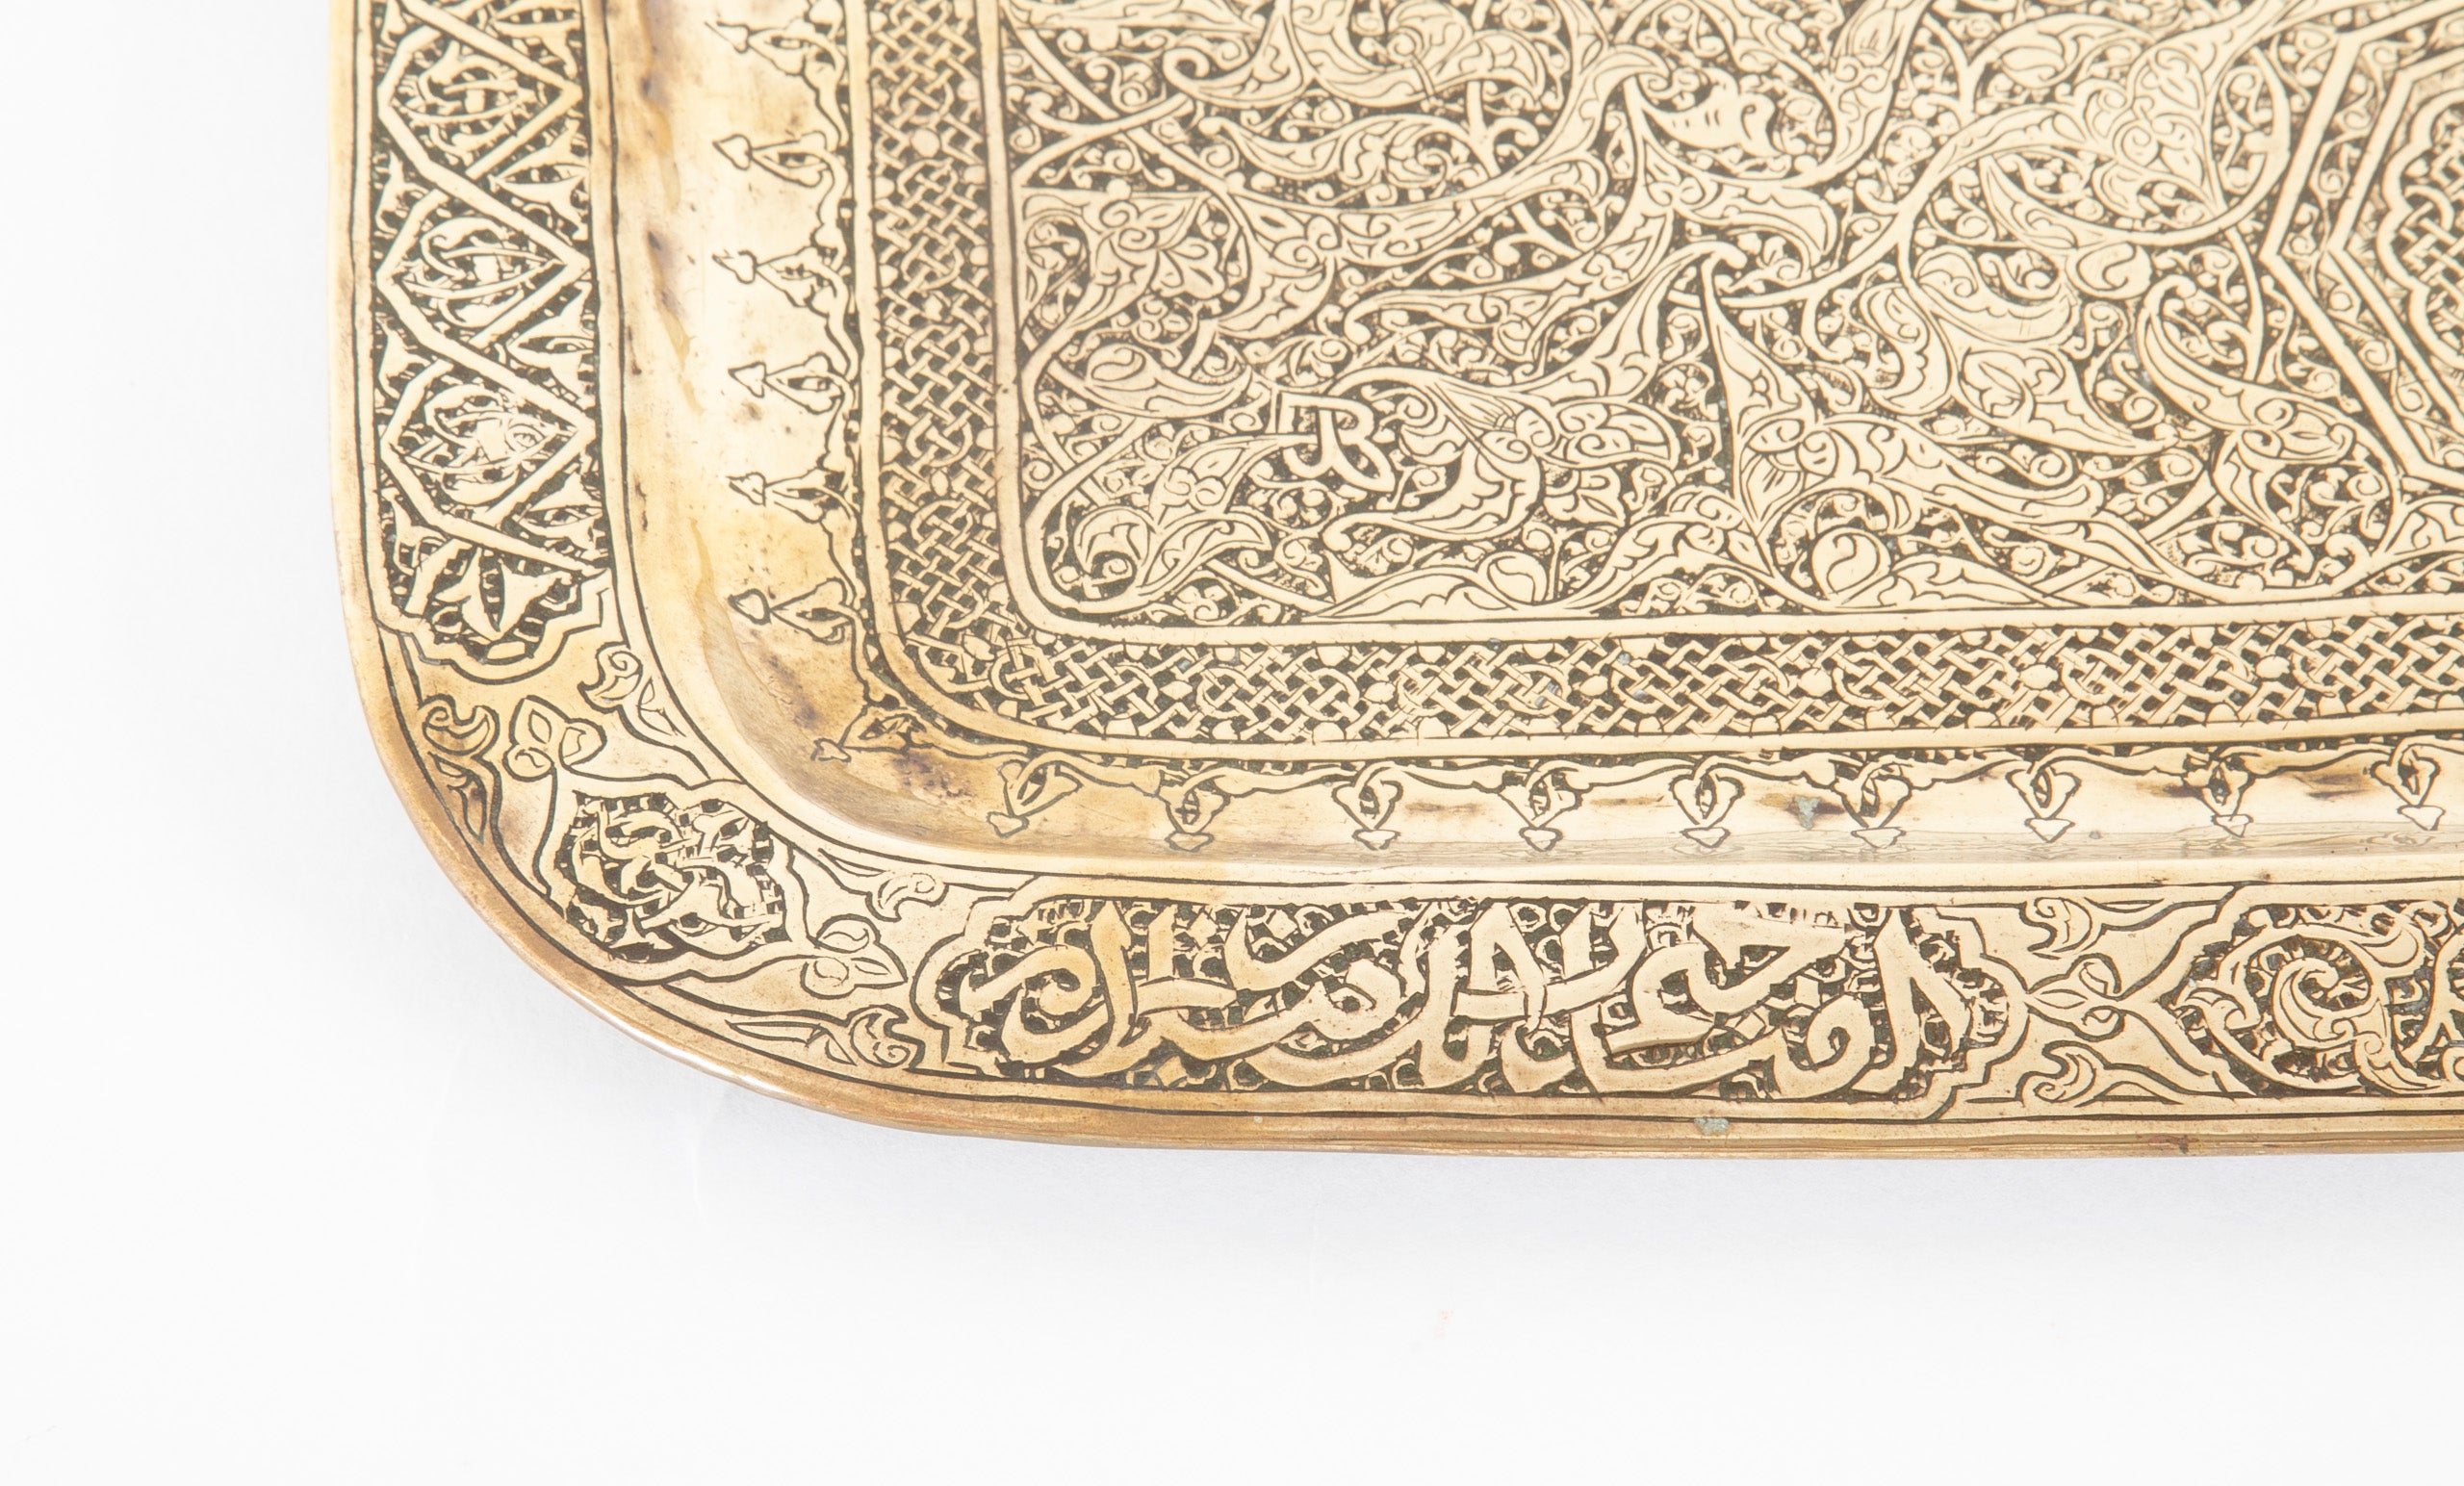 Very Fine Persian Brass Tray with Kufic Calligraphy